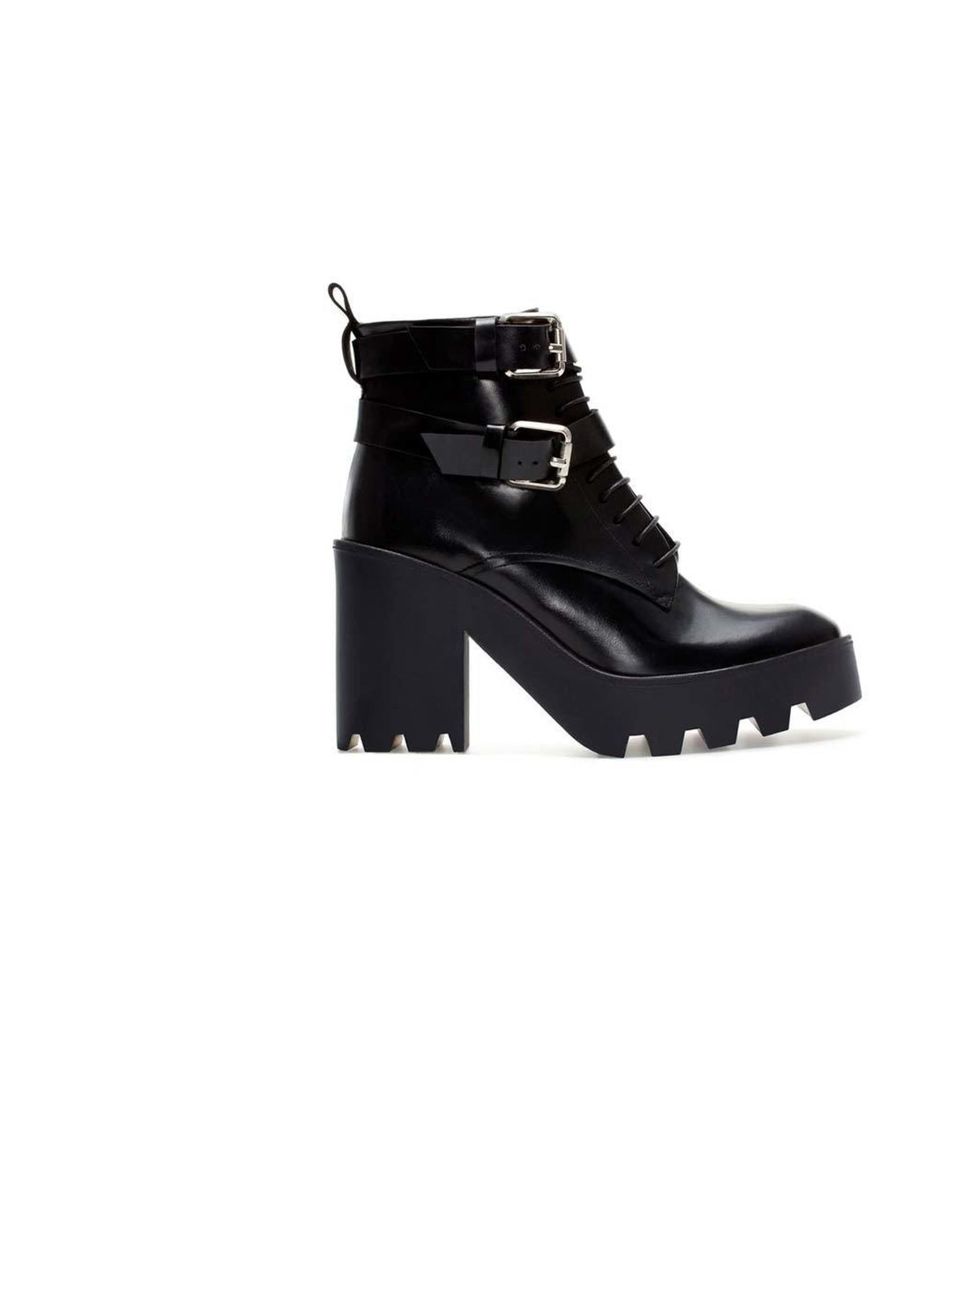 <p>team the look with a pair of chunky and comfortable boots. These are available at <a href="http://www.zara.com/uk/en/woman/shoes/leather-track-ankle-boot-c269191p1468549.html">Zara</a>, £109</p>